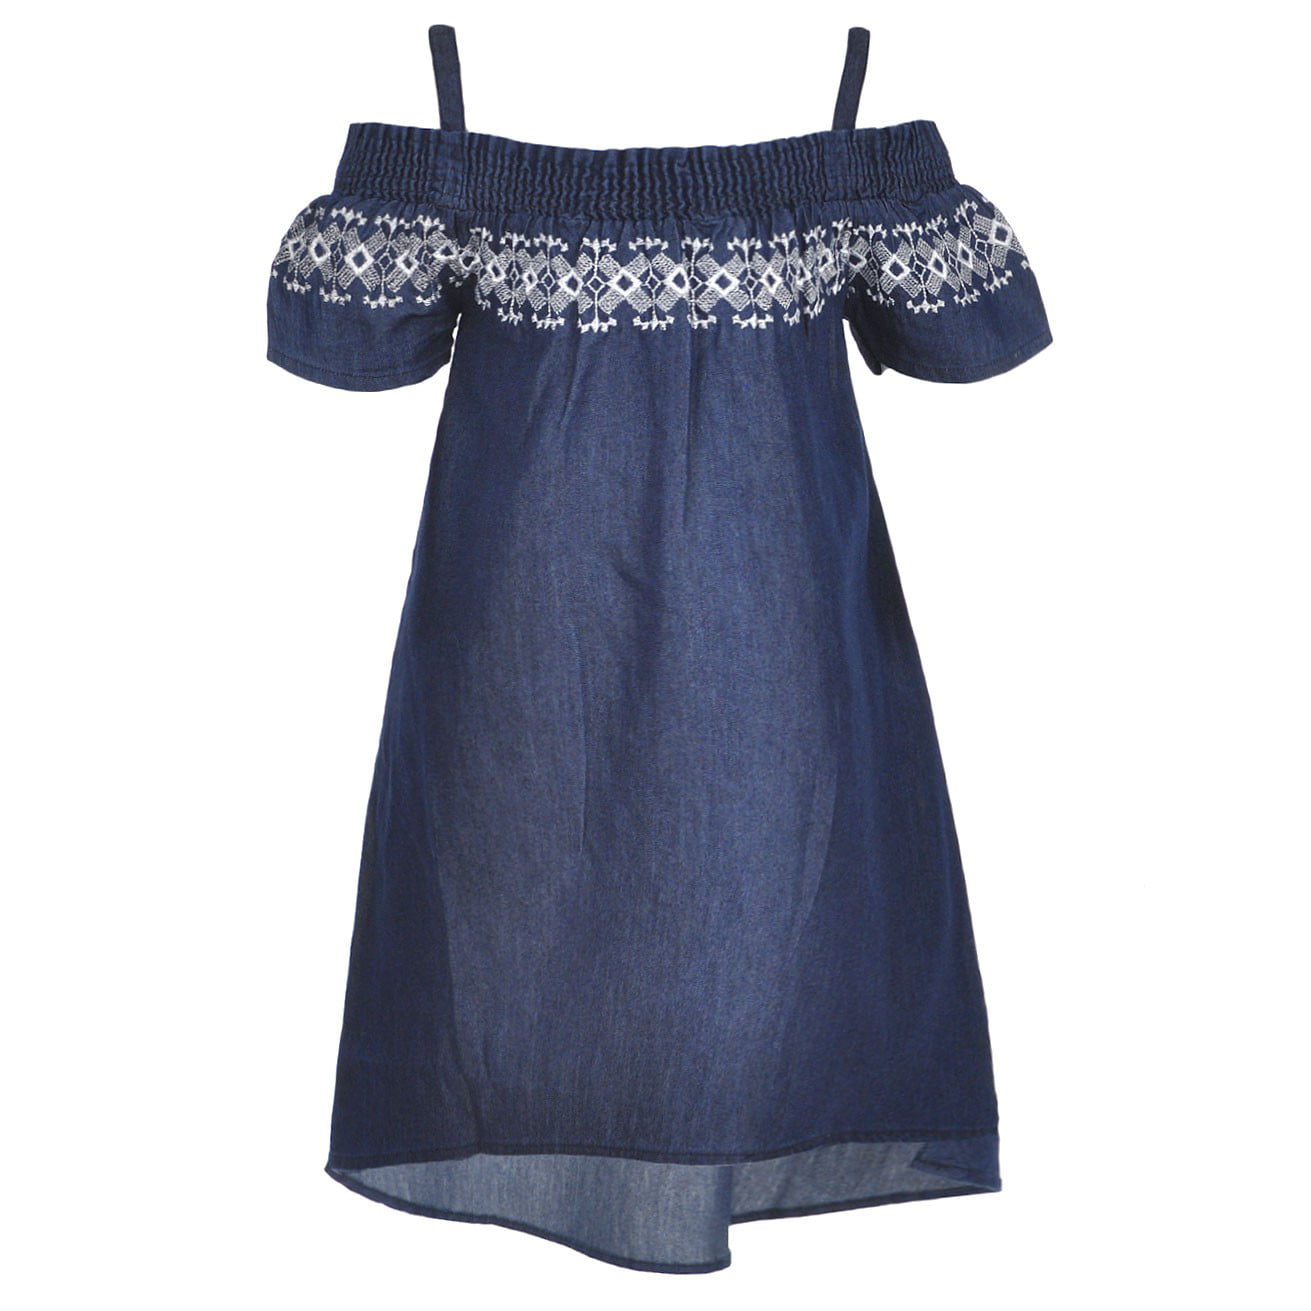 dollhouse Girls 2-Piece Maxi Skirt Set Chambray Top with Woven Hi-Lo Lace Skirt